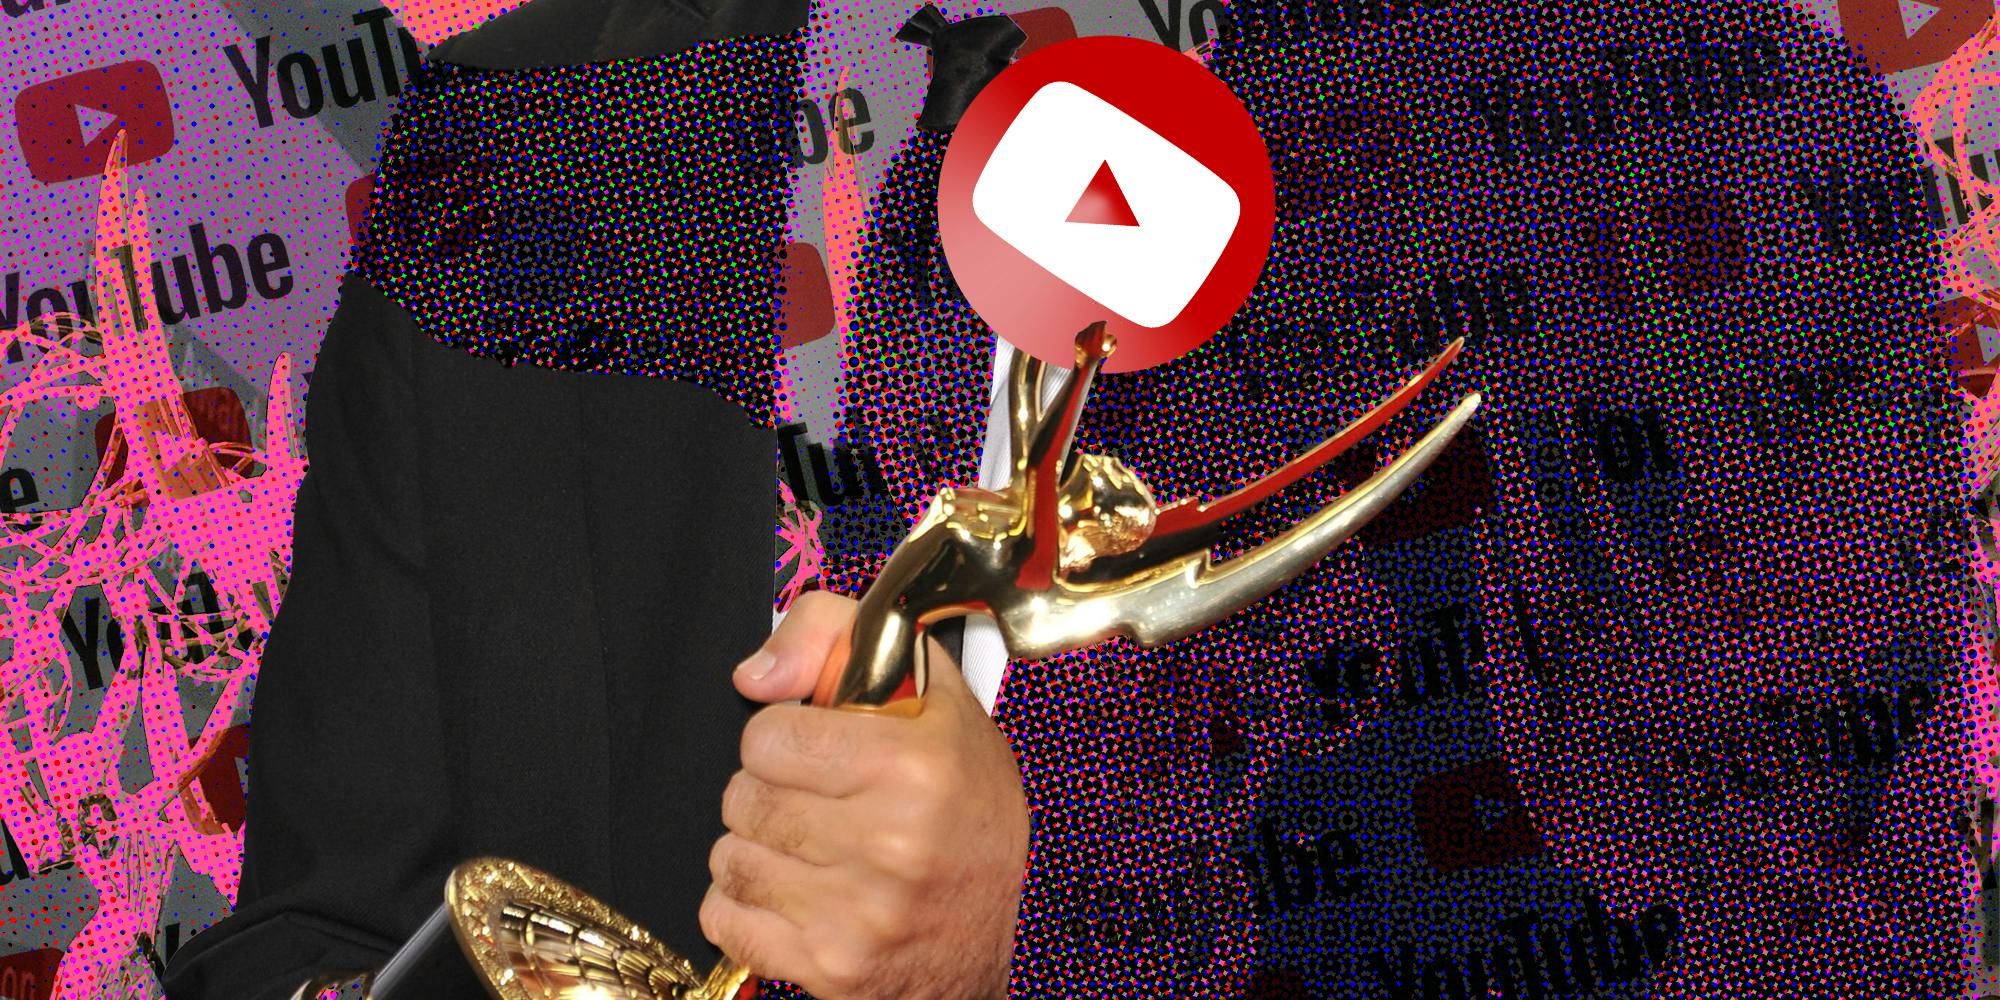 Hand holding emmy holding youtube play button on top of abstarct background with youtube logo